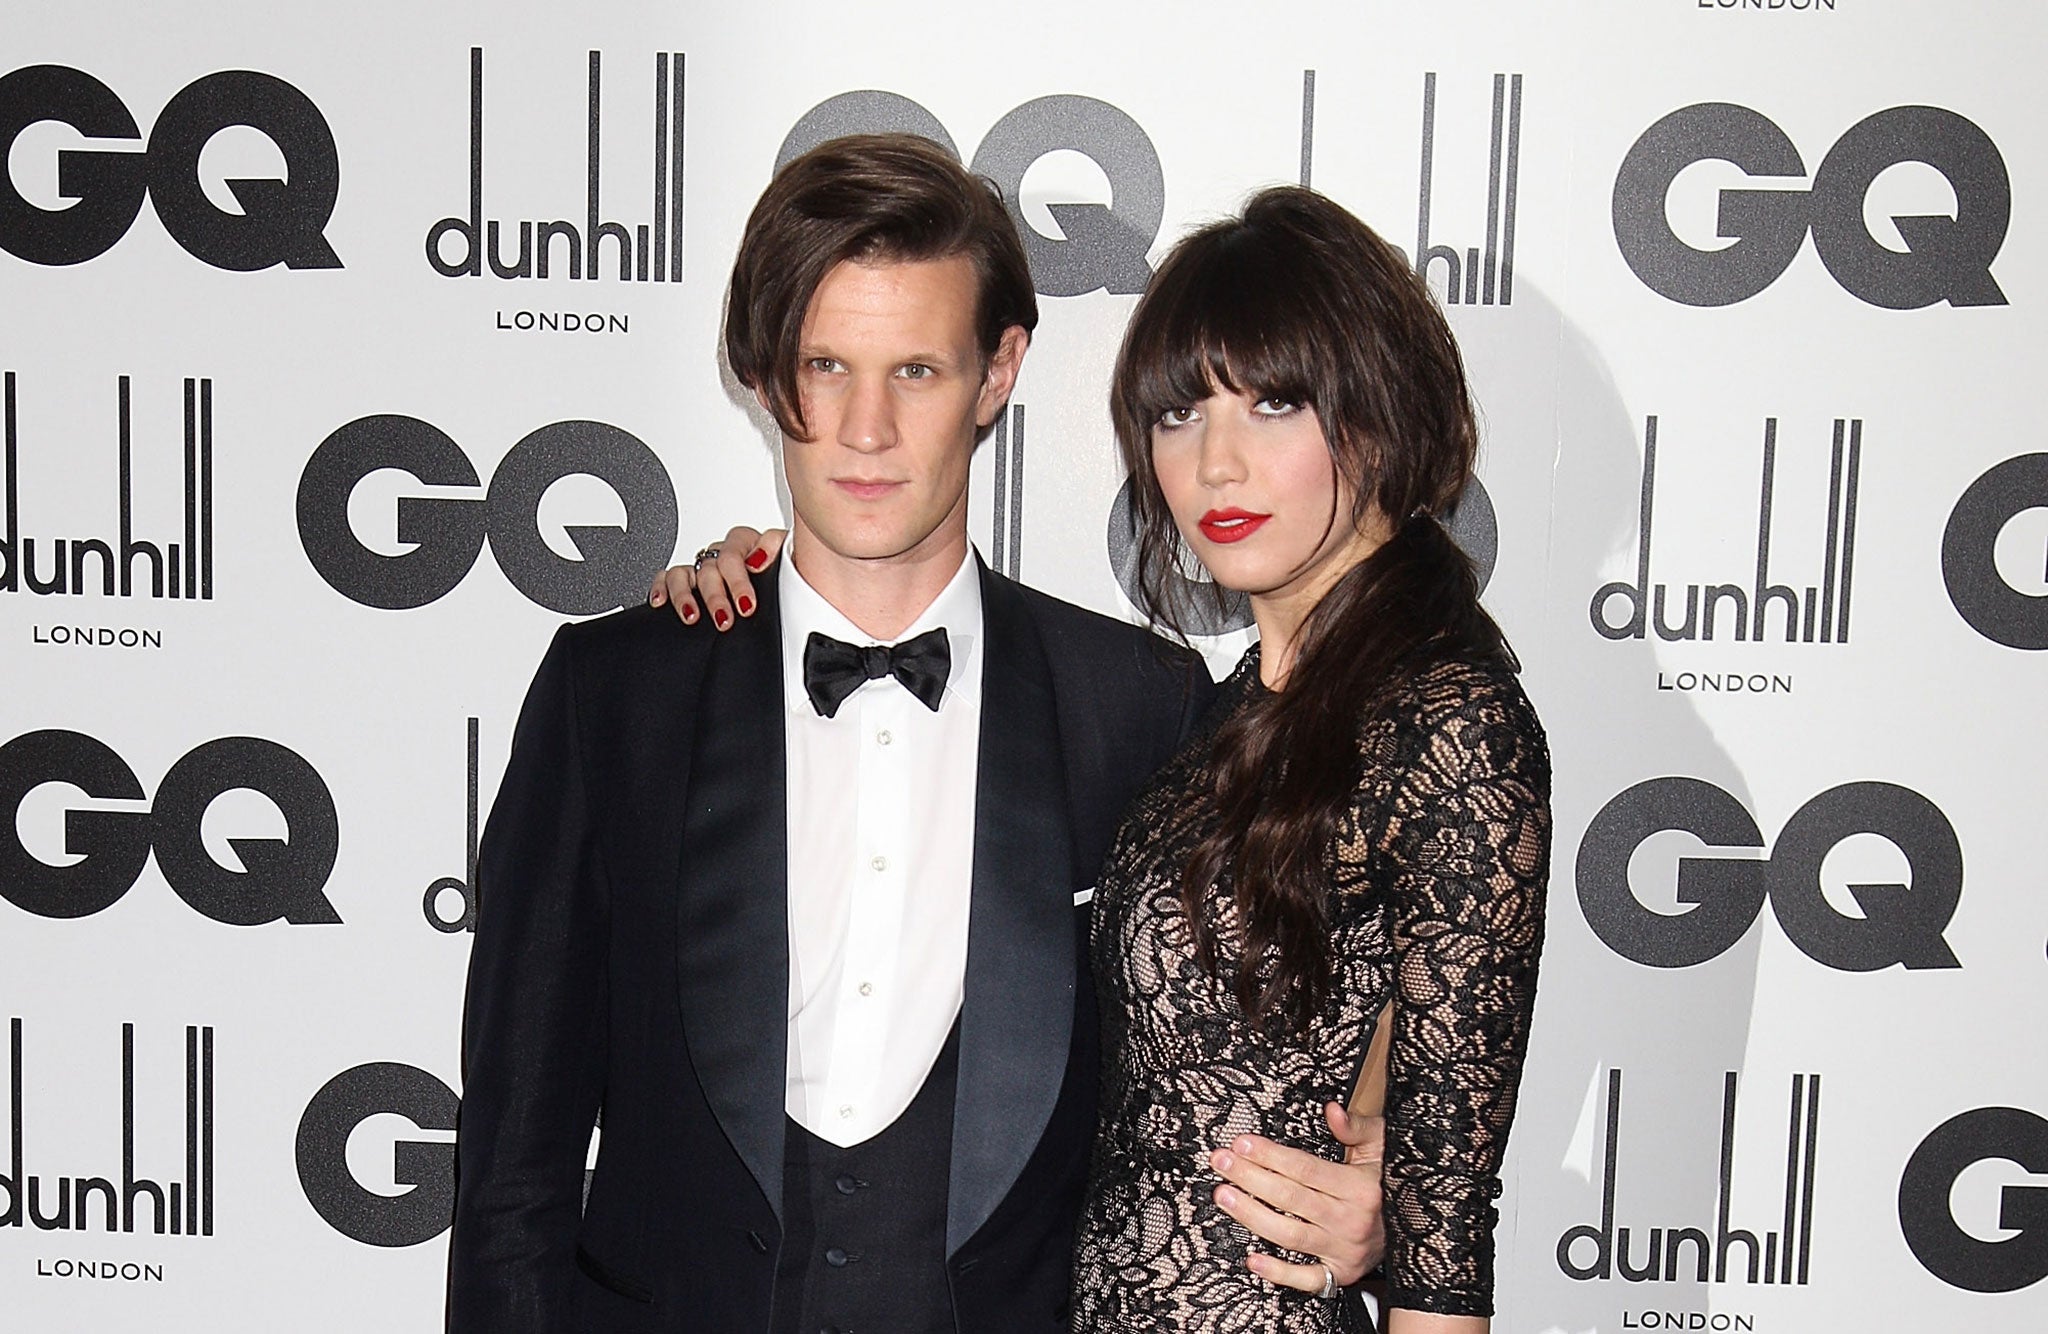 Doctor Who star Matt Smith and ex-girl friend Daisy Lowe targeted in nude photo hacking The Independent The Independent pic picture